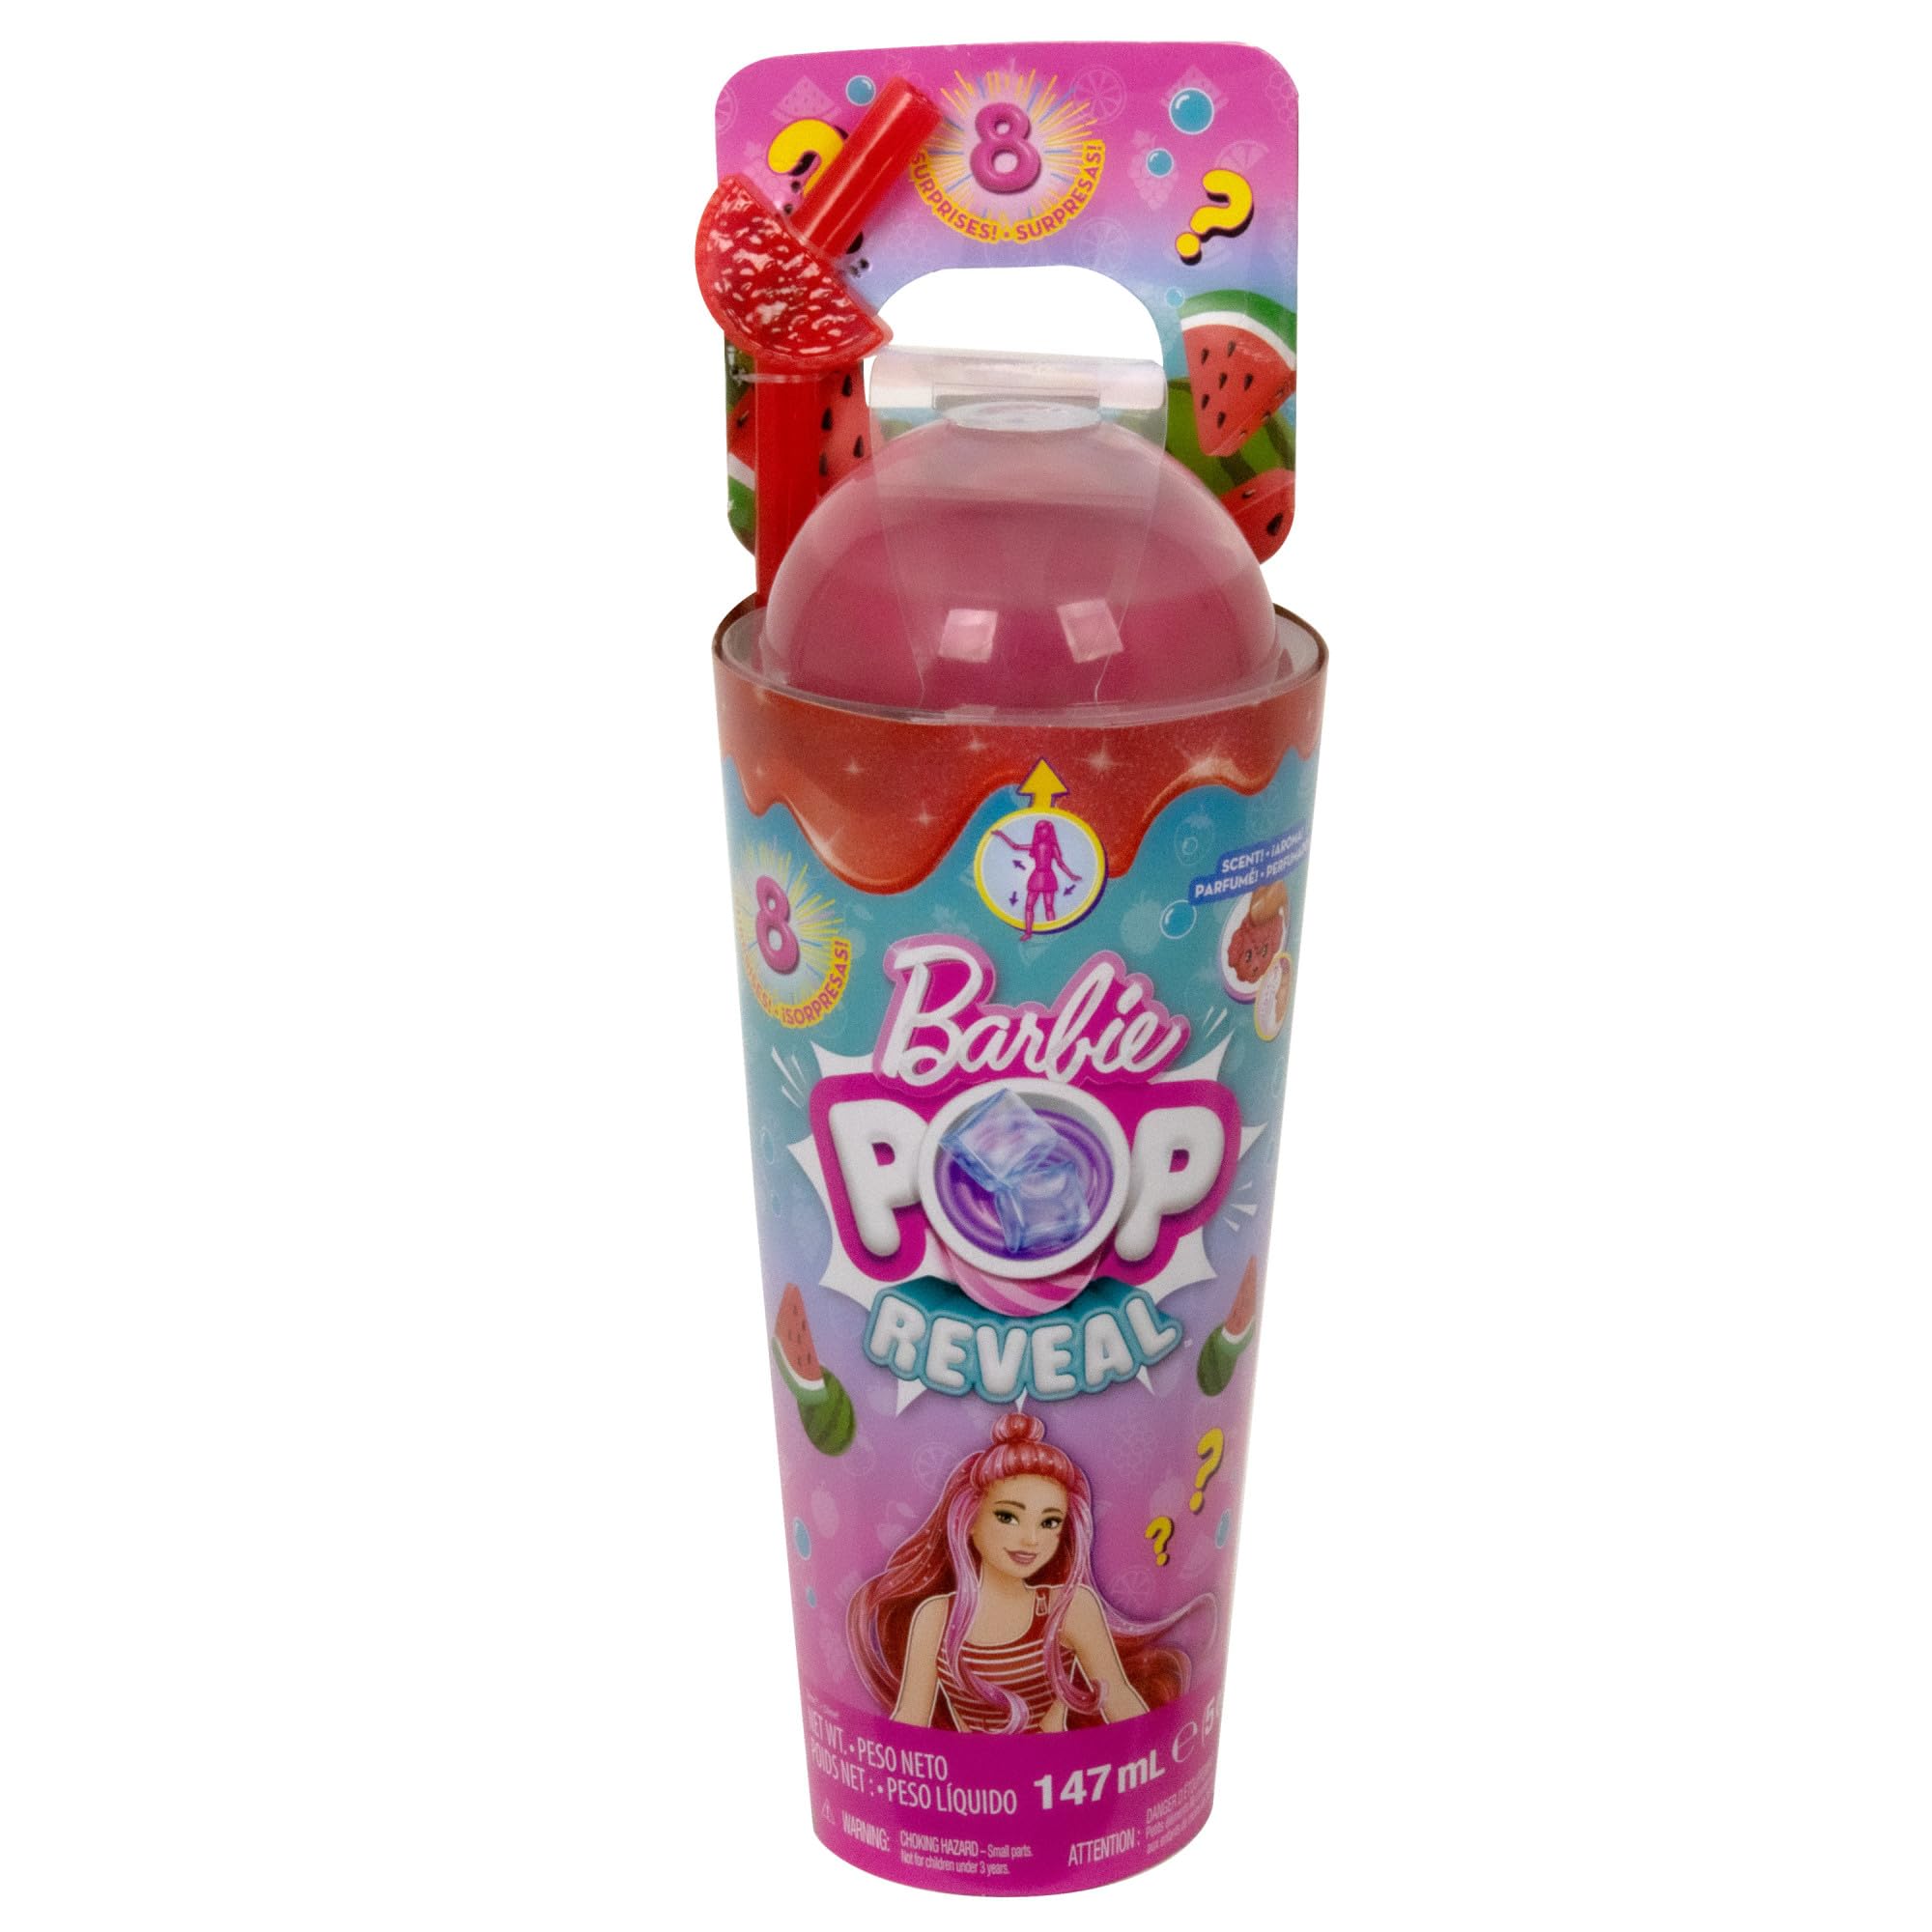 Barbie Pop Reveal Doll & Accessories, Watermelon Crush Scent with Red Hair, 8 Surprises Include Slime & Squishy Puppy